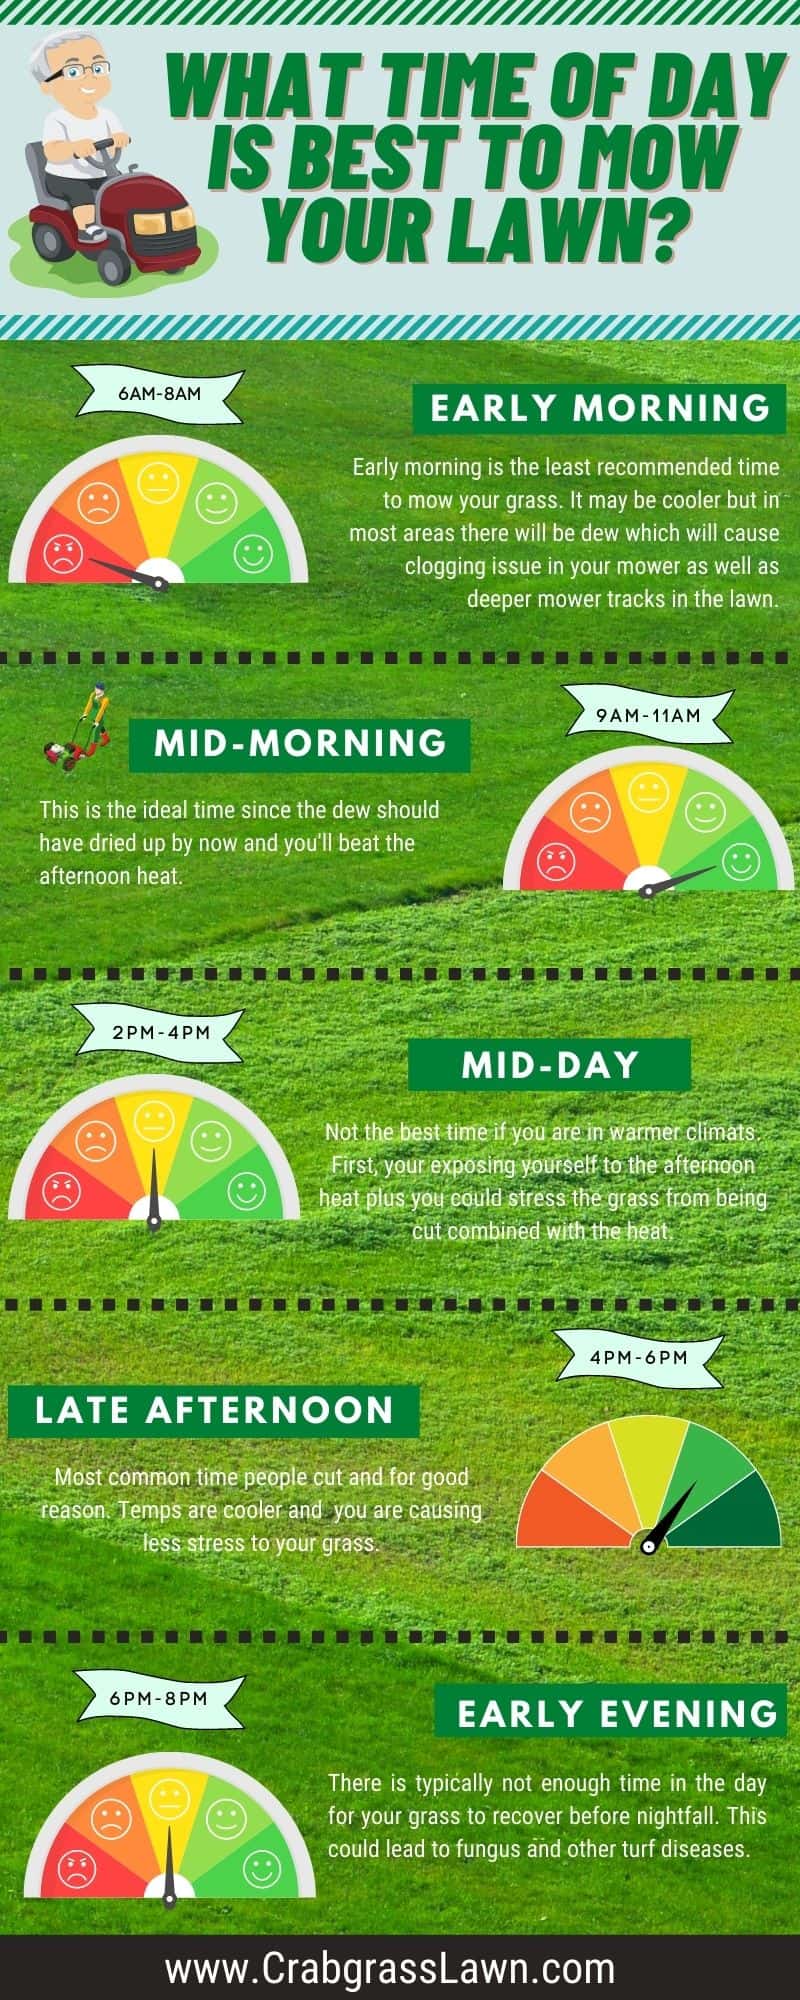 what is the best time of day to mow your lawn infographic